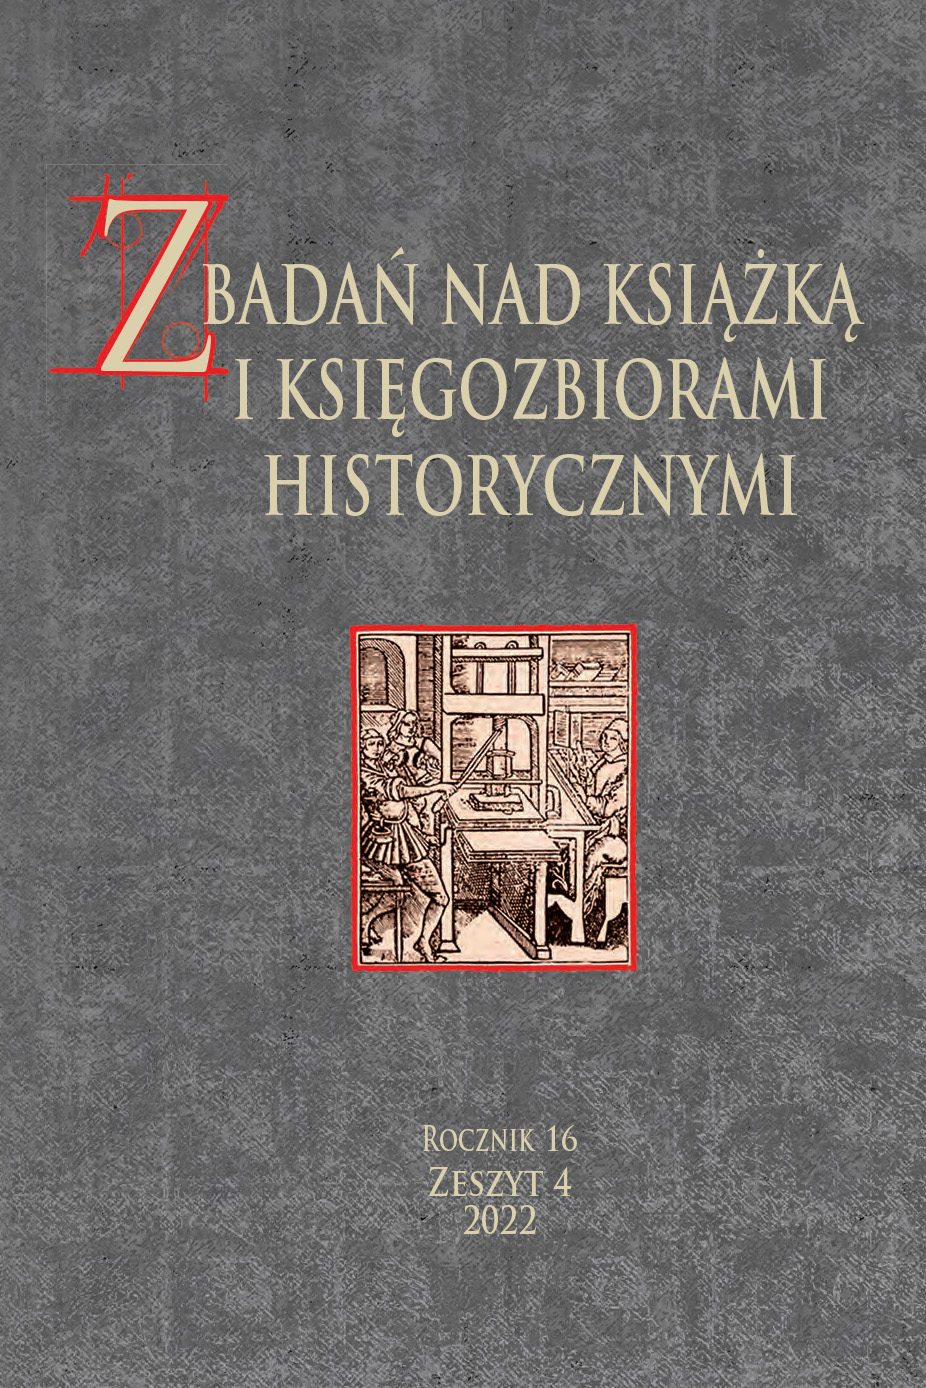 Bibliology (book science)
and its practical applications in the works
of Professor Barbara Bieńkowska (1934–2022) Cover Image